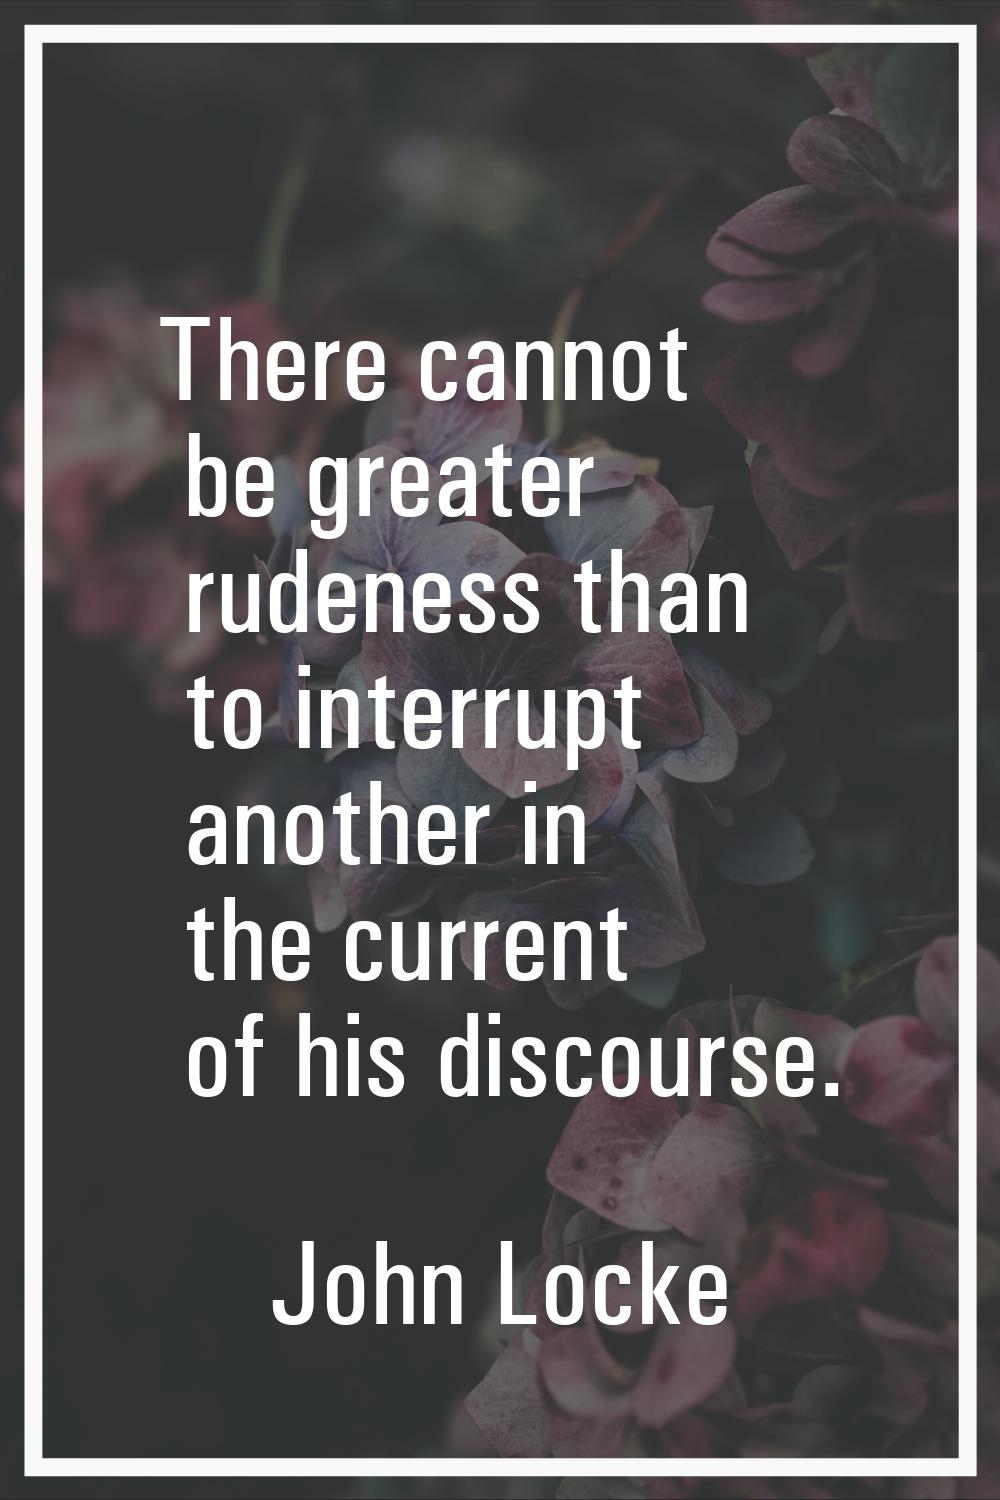 There cannot be greater rudeness than to interrupt another in the current of his discourse.